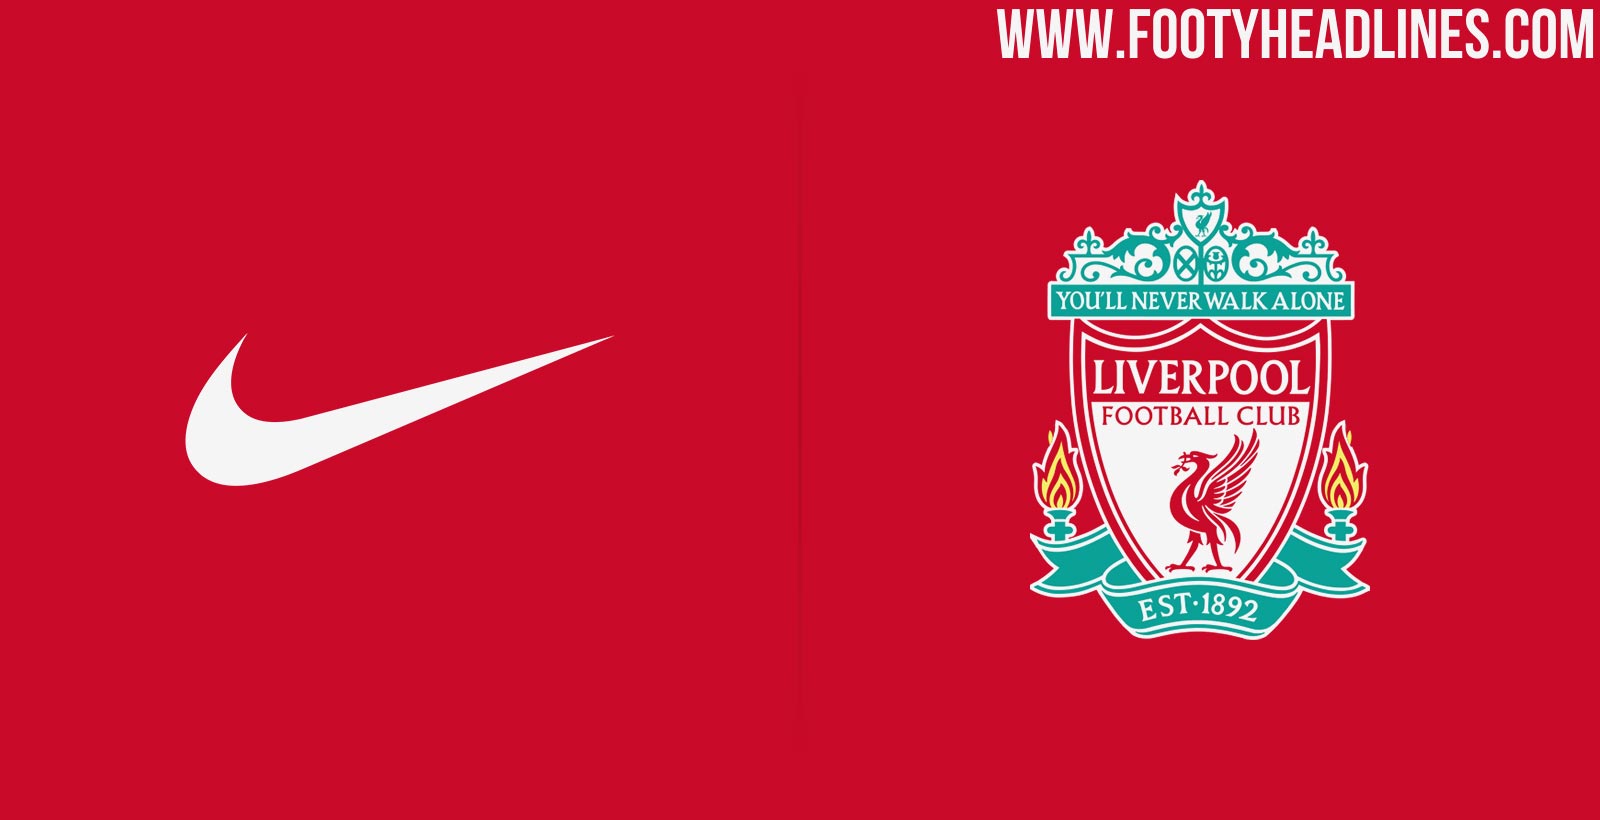 Reports: Nike Offers Liverpool Record Kit Deal - Footy Headlines1600 x 820